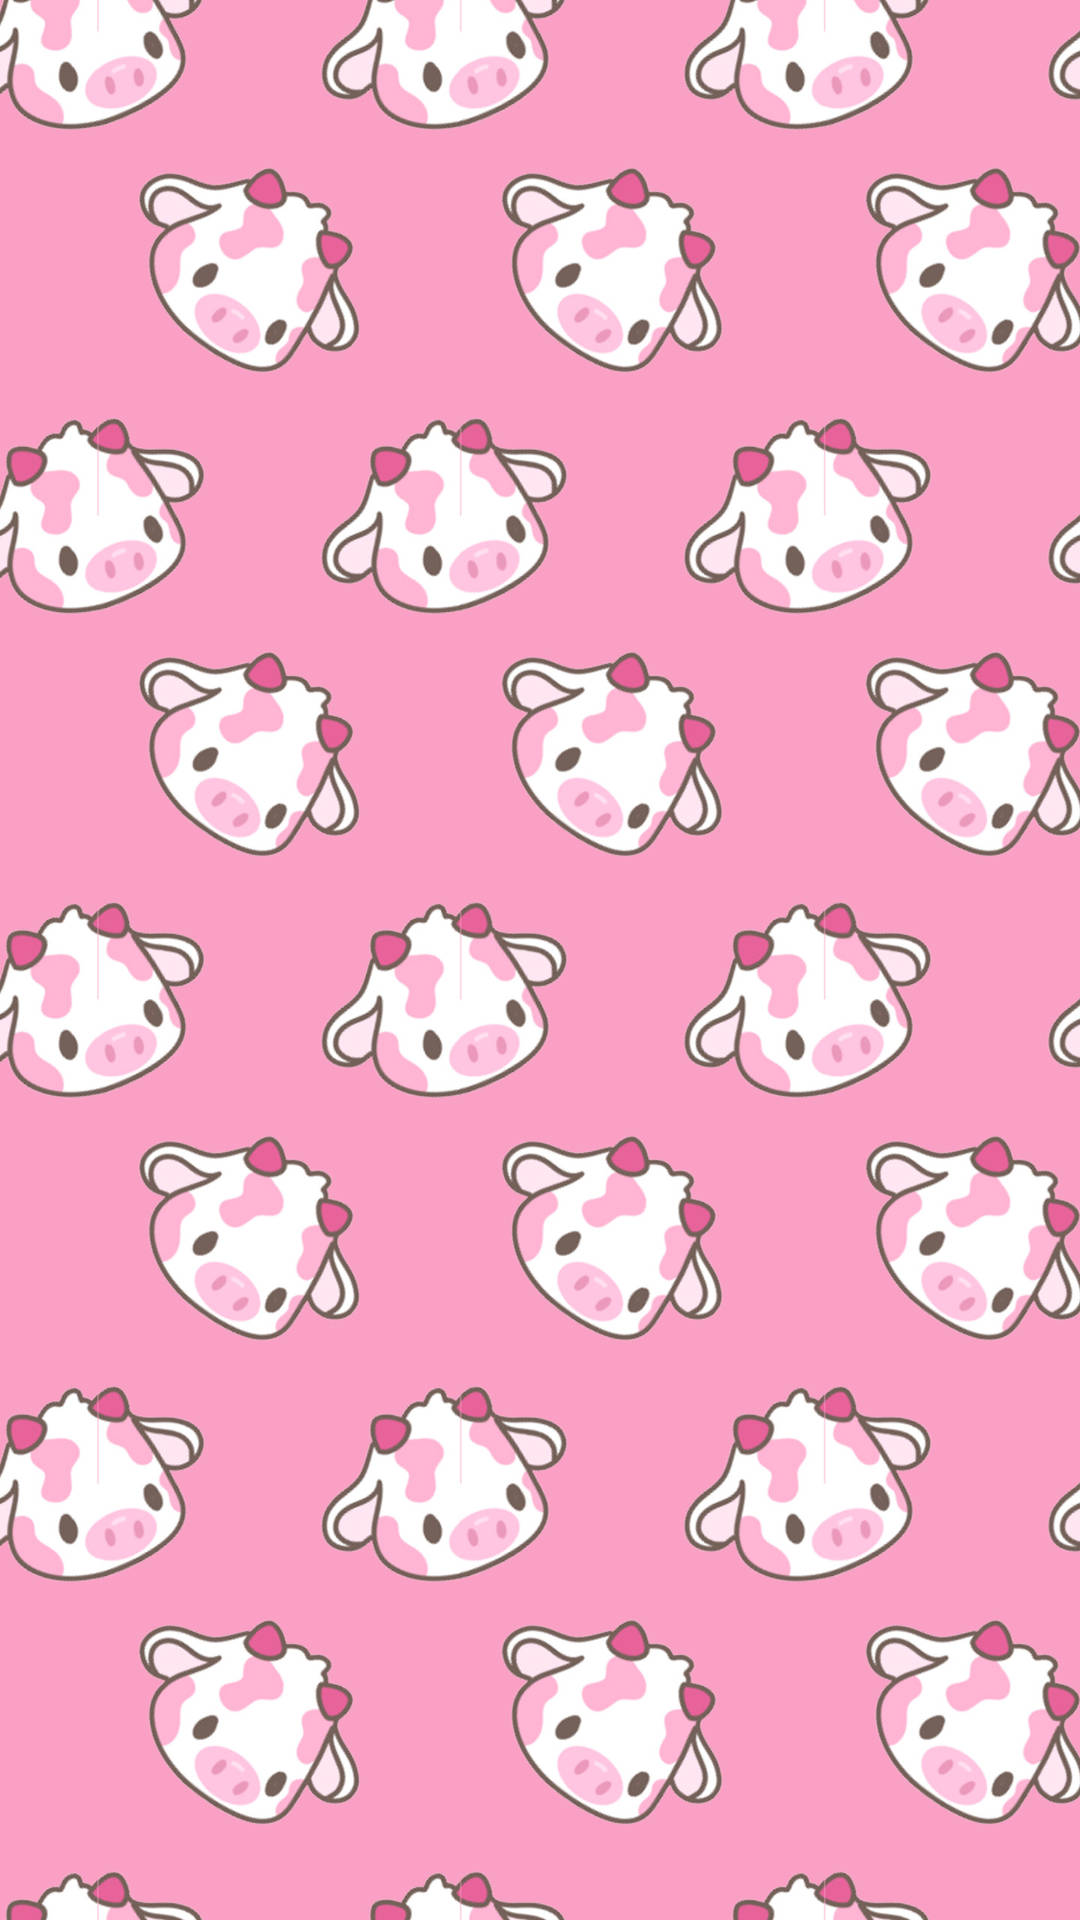 Download Strawberry Cow With Horns Tiled Wallpaper